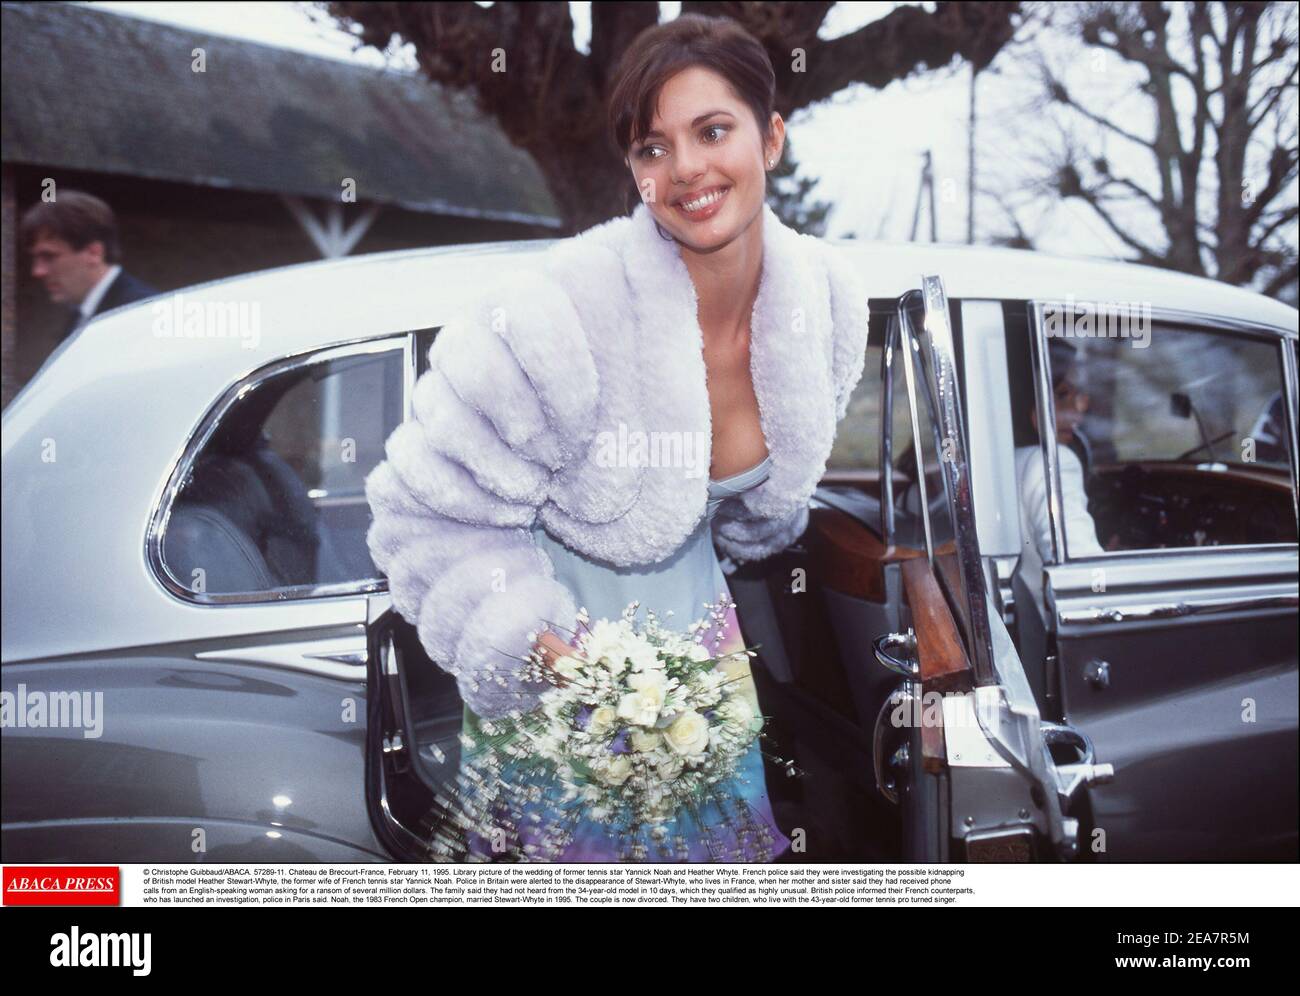 © Christophe Guibbaud/ABACA. 57289-11. Chateau de Brecourt-France, February 11, 1995. Library picture of the wedding of former tennis star Yannick Noah and Heather Whyte. French police said they were investigating the possible kidnapping of British model Heather Stewart-Whyte, the former wife of French tennis star Yannick Noah. Police in Britain were alerted to the disappearance of Stewart-Whyte, who lives in France, when her mother and sister said they had received phone calls from an English-speaking woman asking for a ransom of several million dollars. The family said they had not heard fro Stock Photo